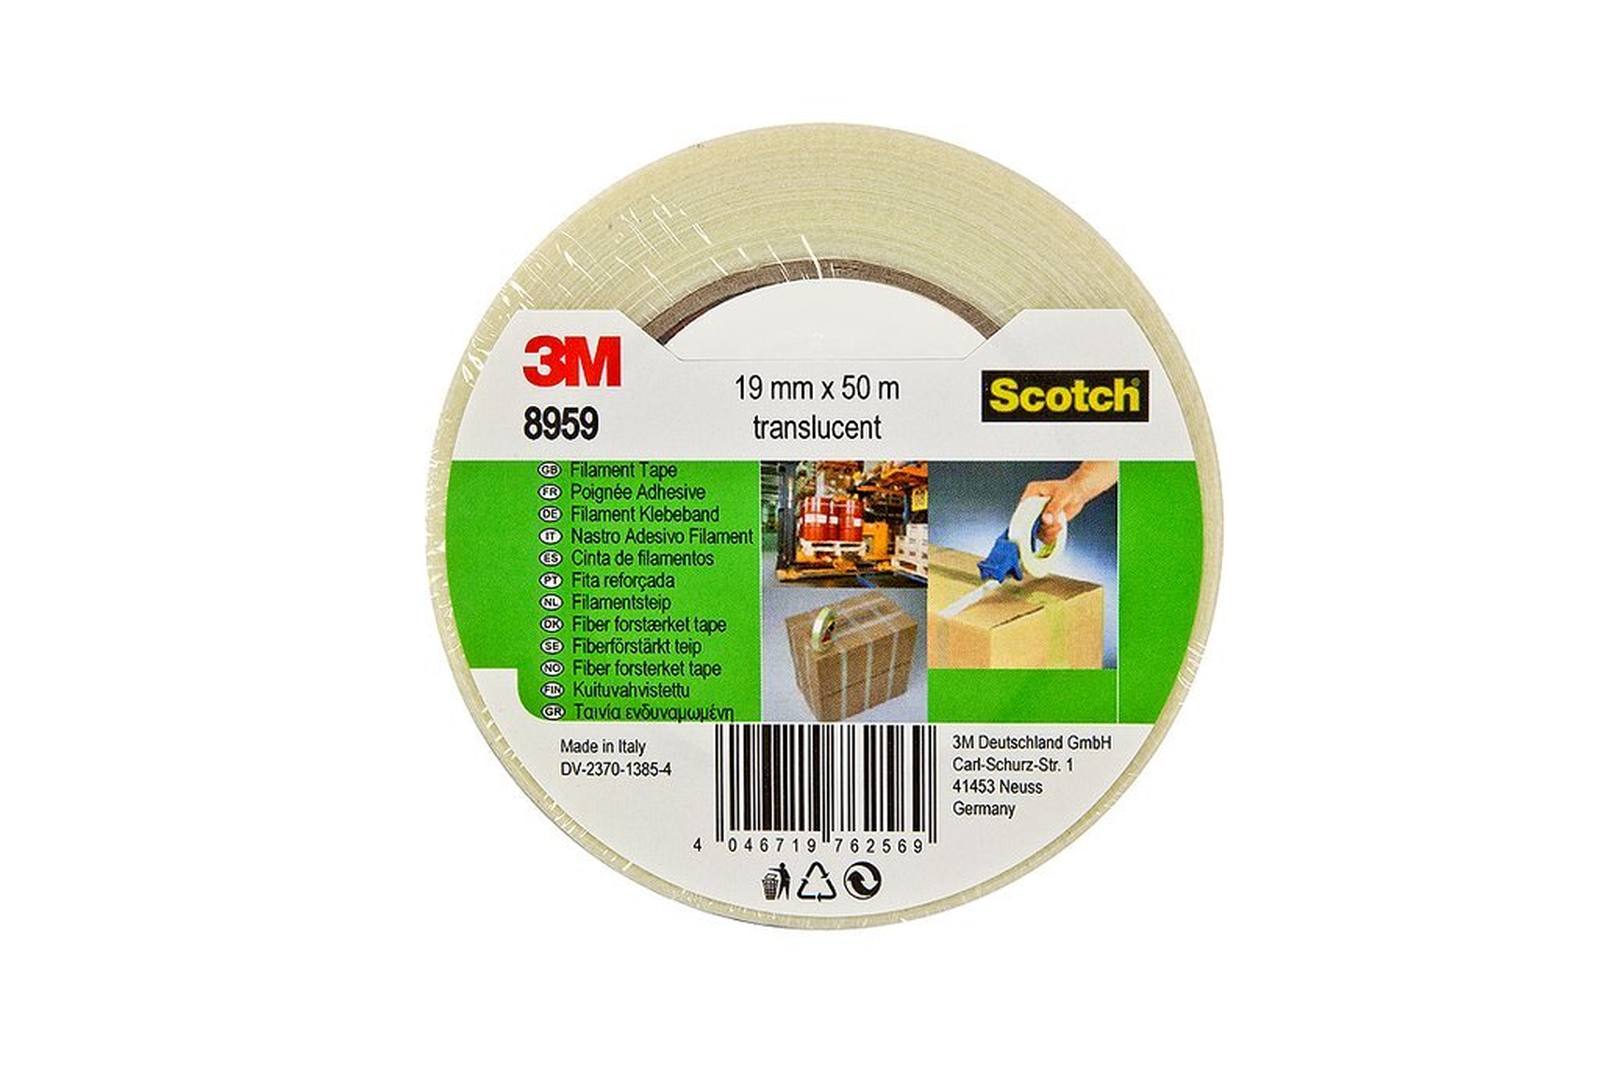 3M Scotch filament tape 8959, transparent, 50 mm x 50 m, 0.145 mm, individually packed